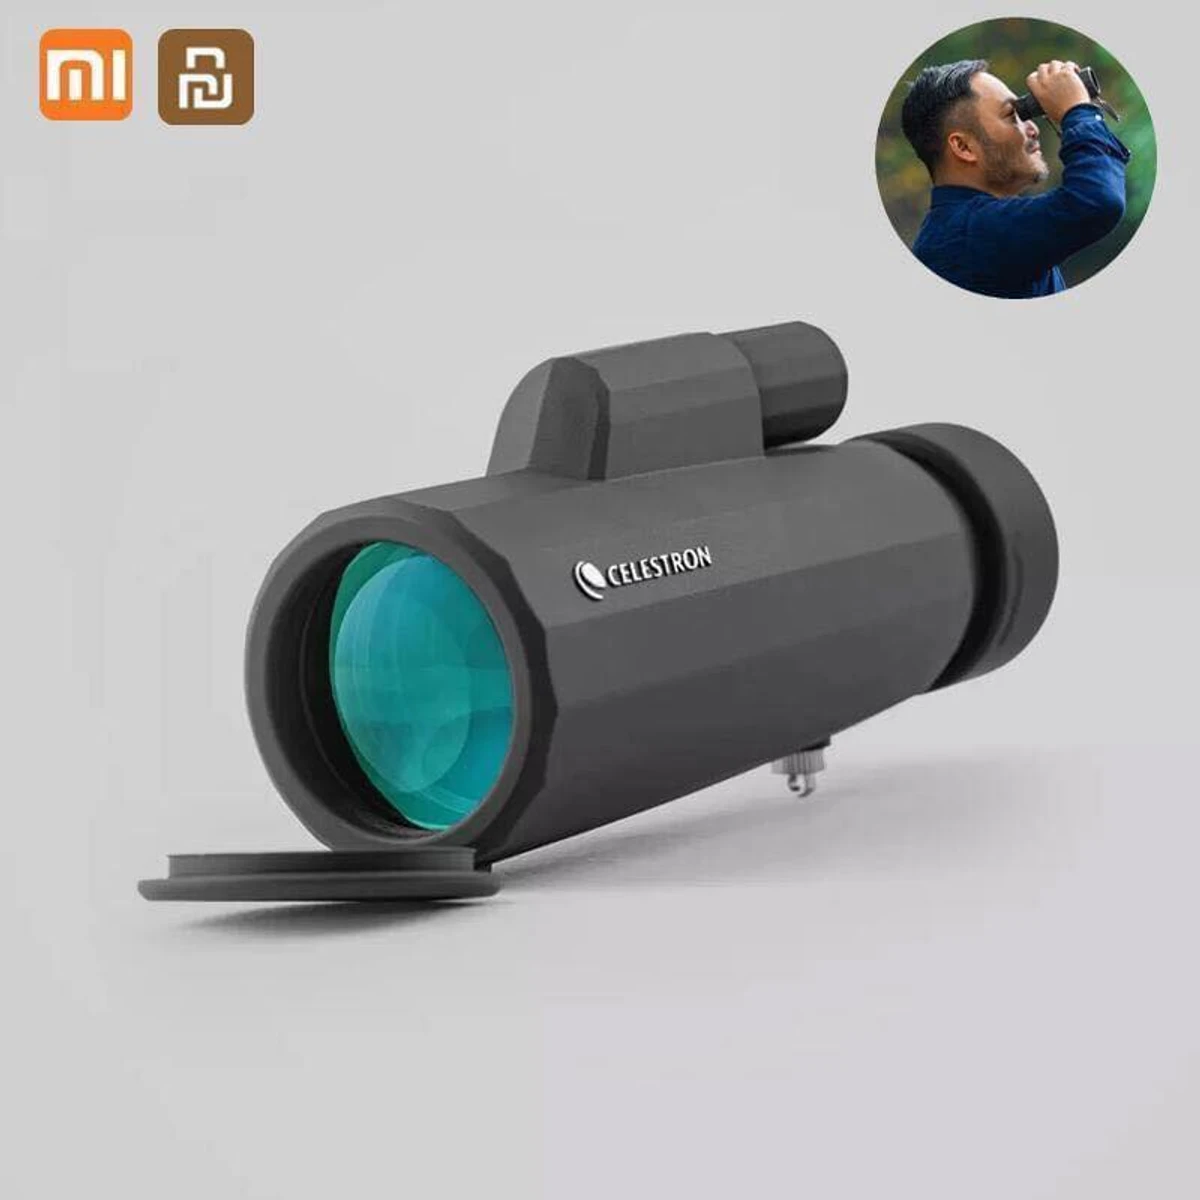 Optical Lens Waterproof Monocular Telescope with low light Night Vision